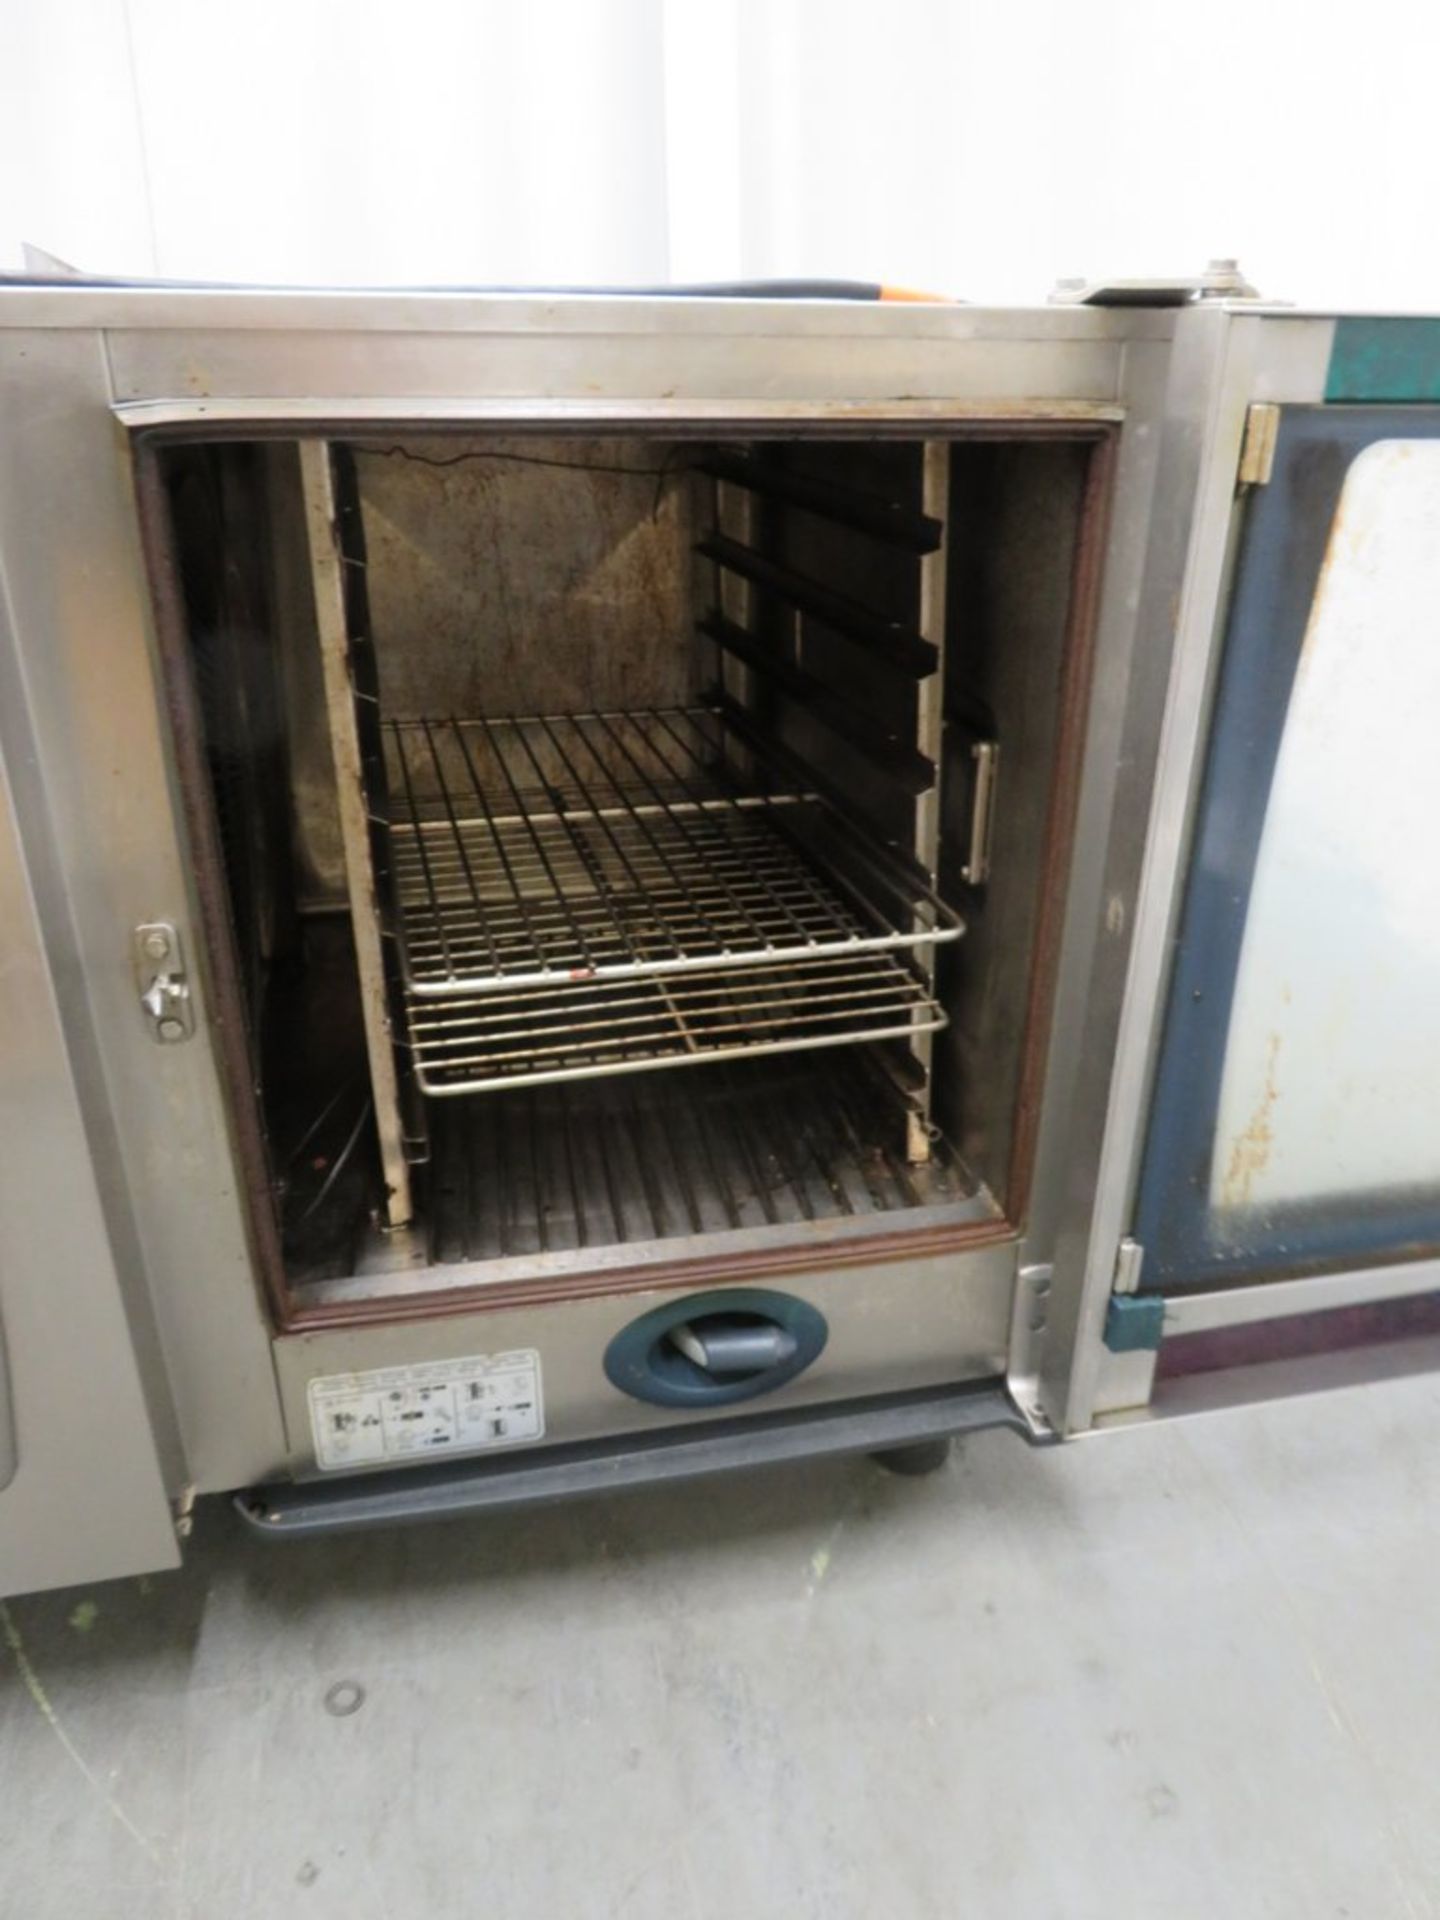 Rational CMP 61 Combi Master Plus 6 grid combi oven, 3 phase electric - Image 5 of 12